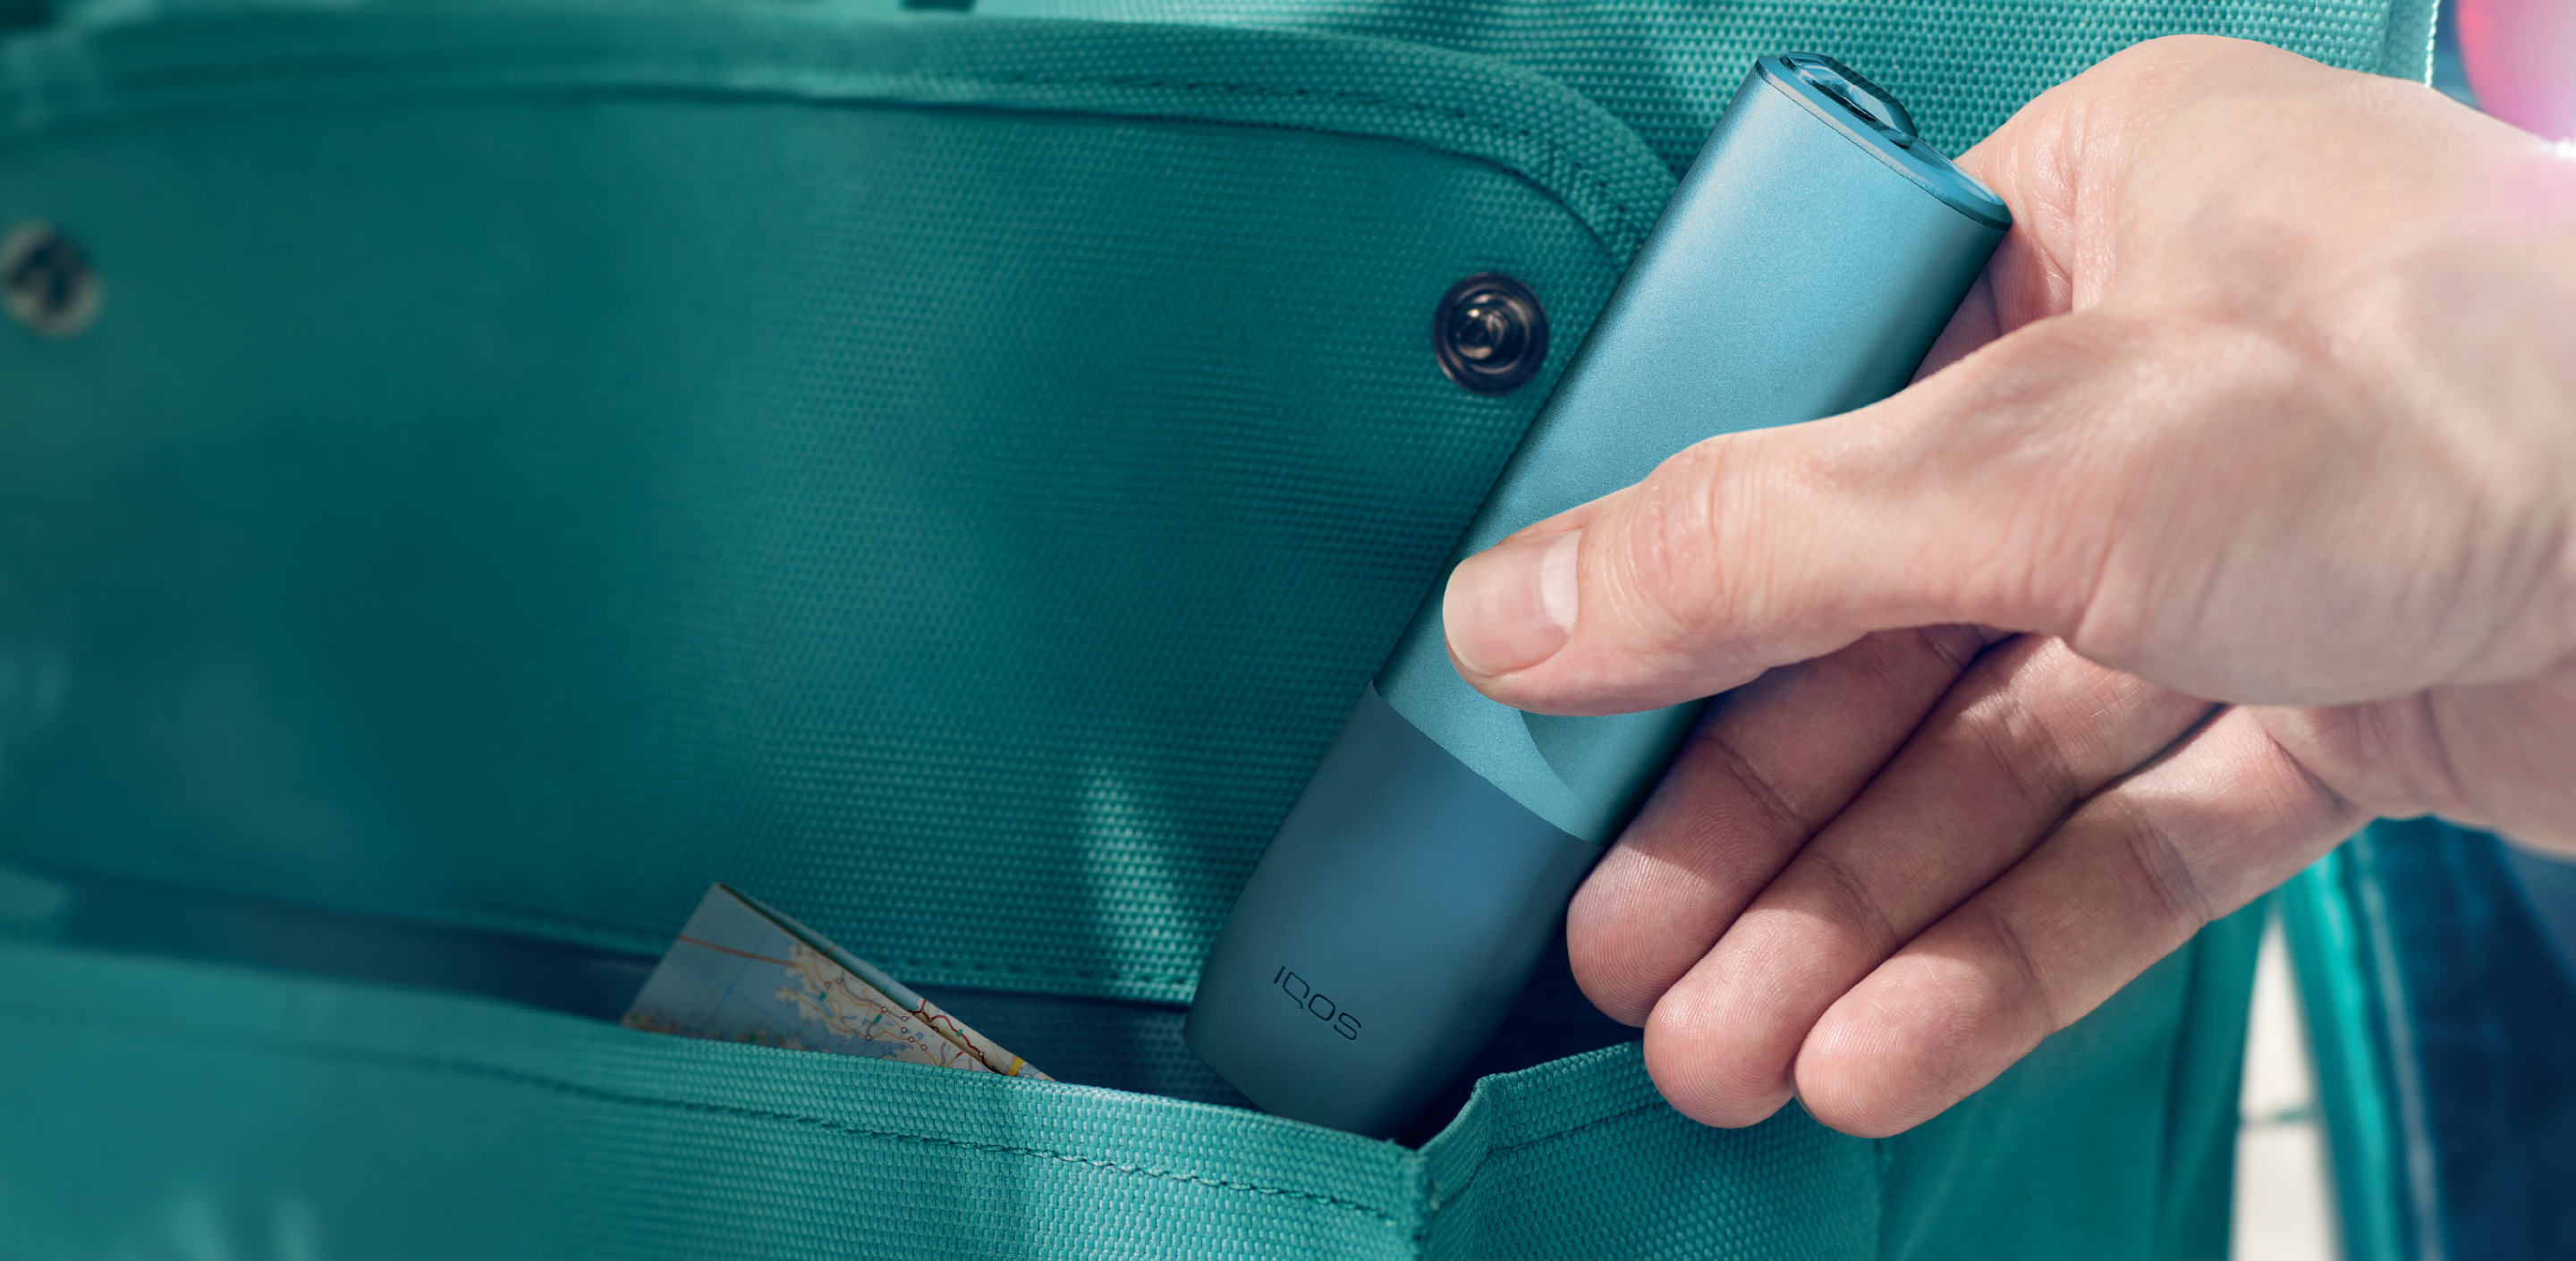 An IQOS ILUMA device in a person's hand.